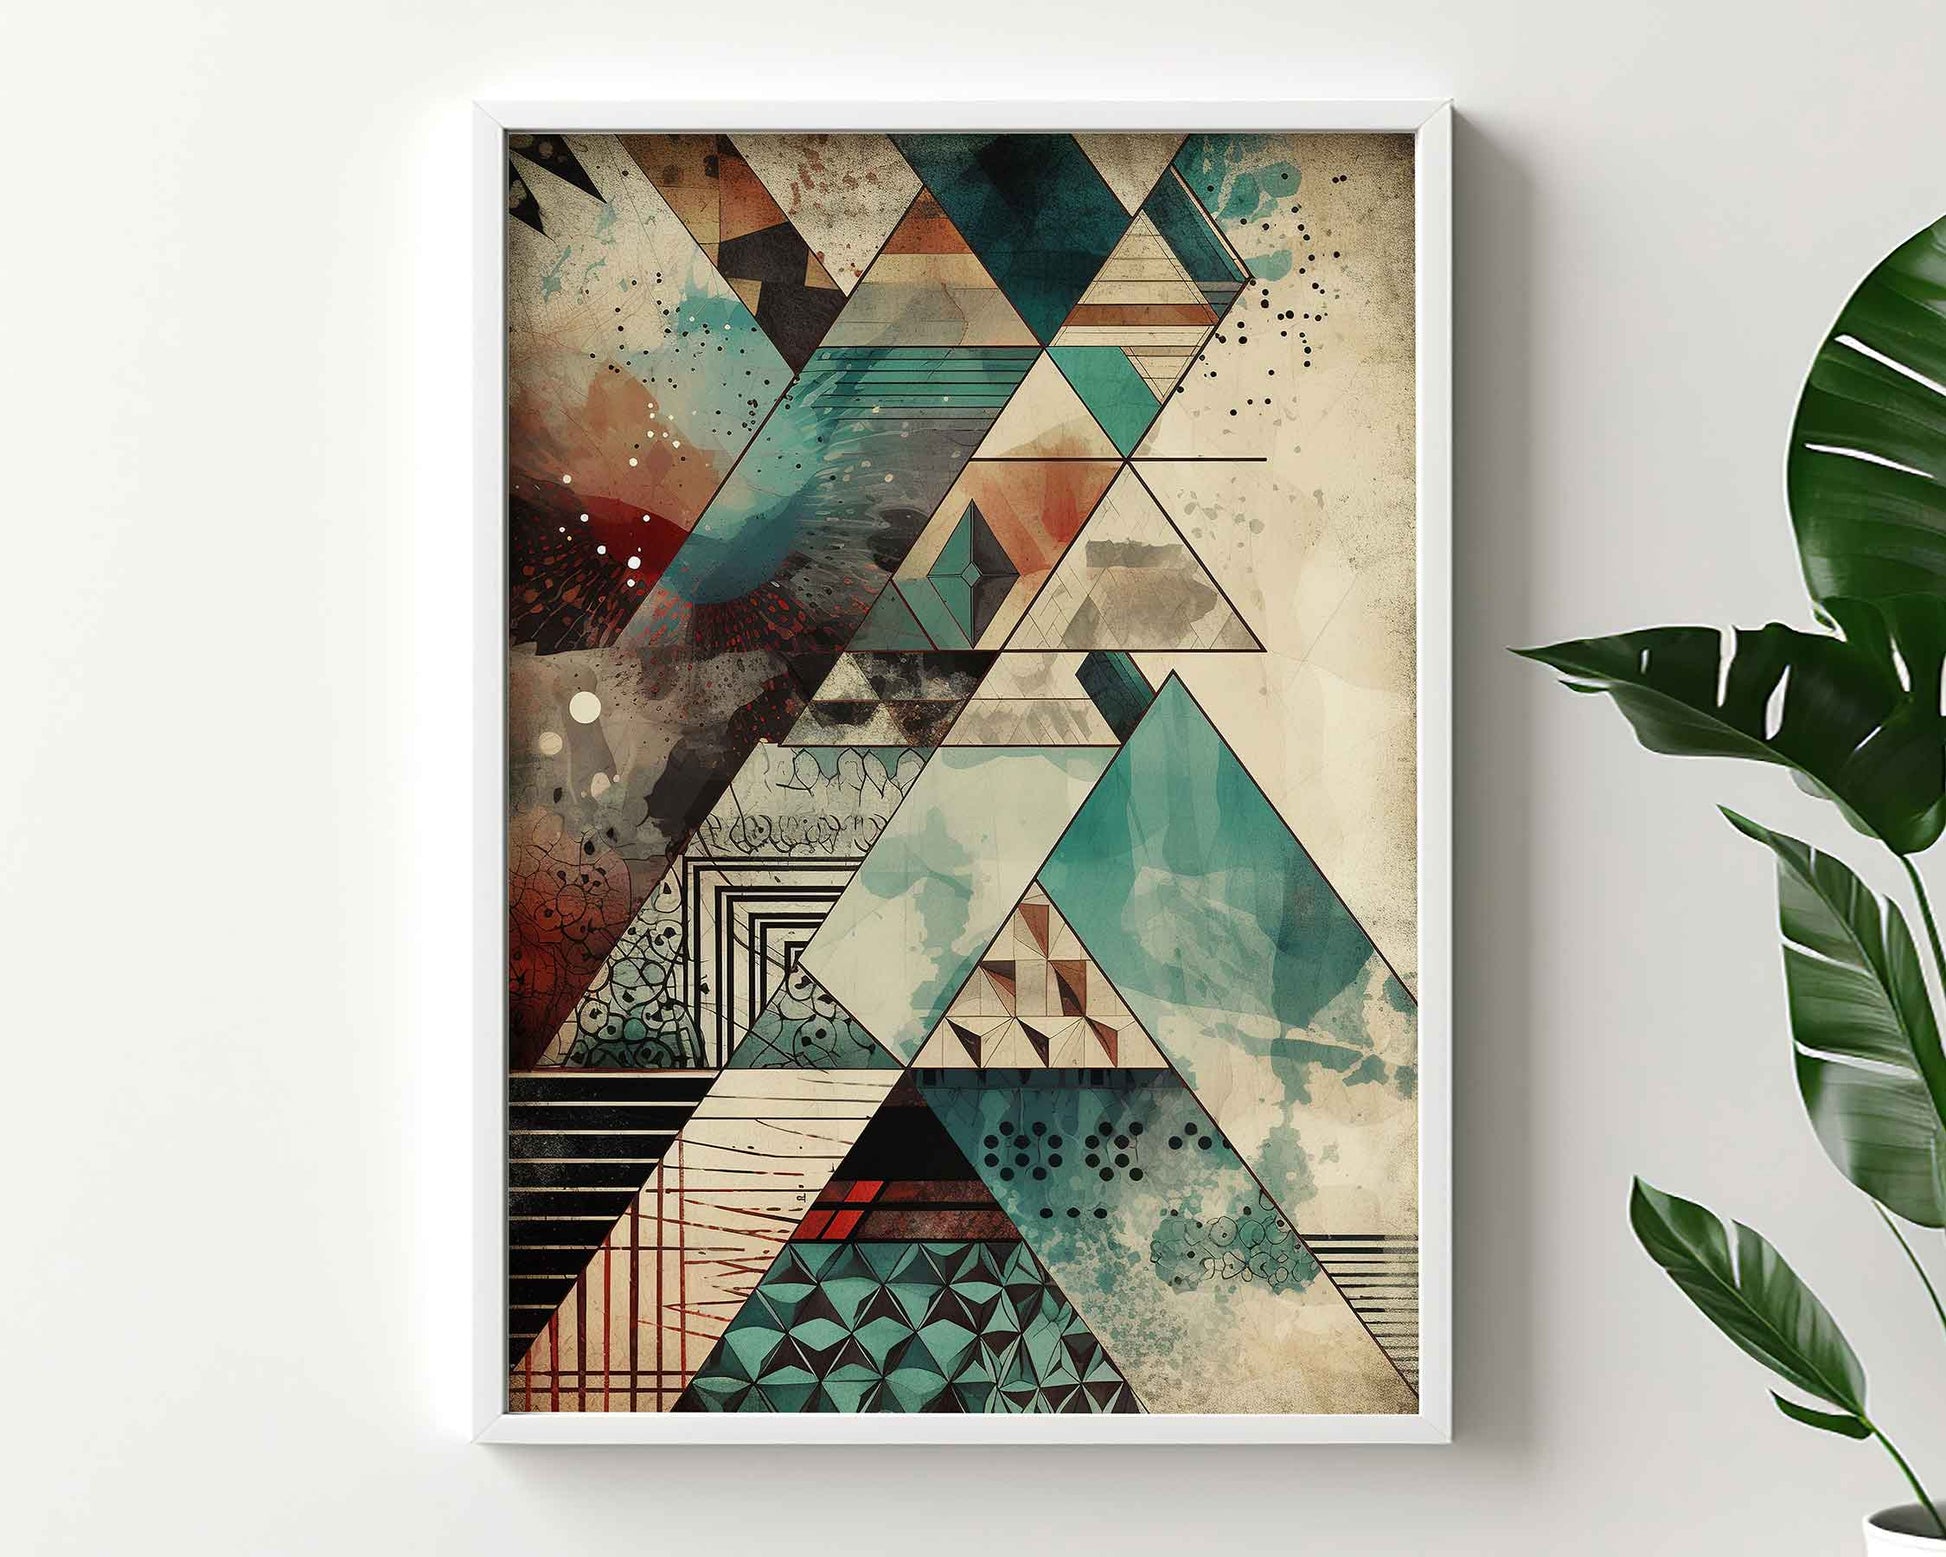 Framed Image of Boho Abstract Aztec Tribal Geometric Style Wall Art Poster Prints